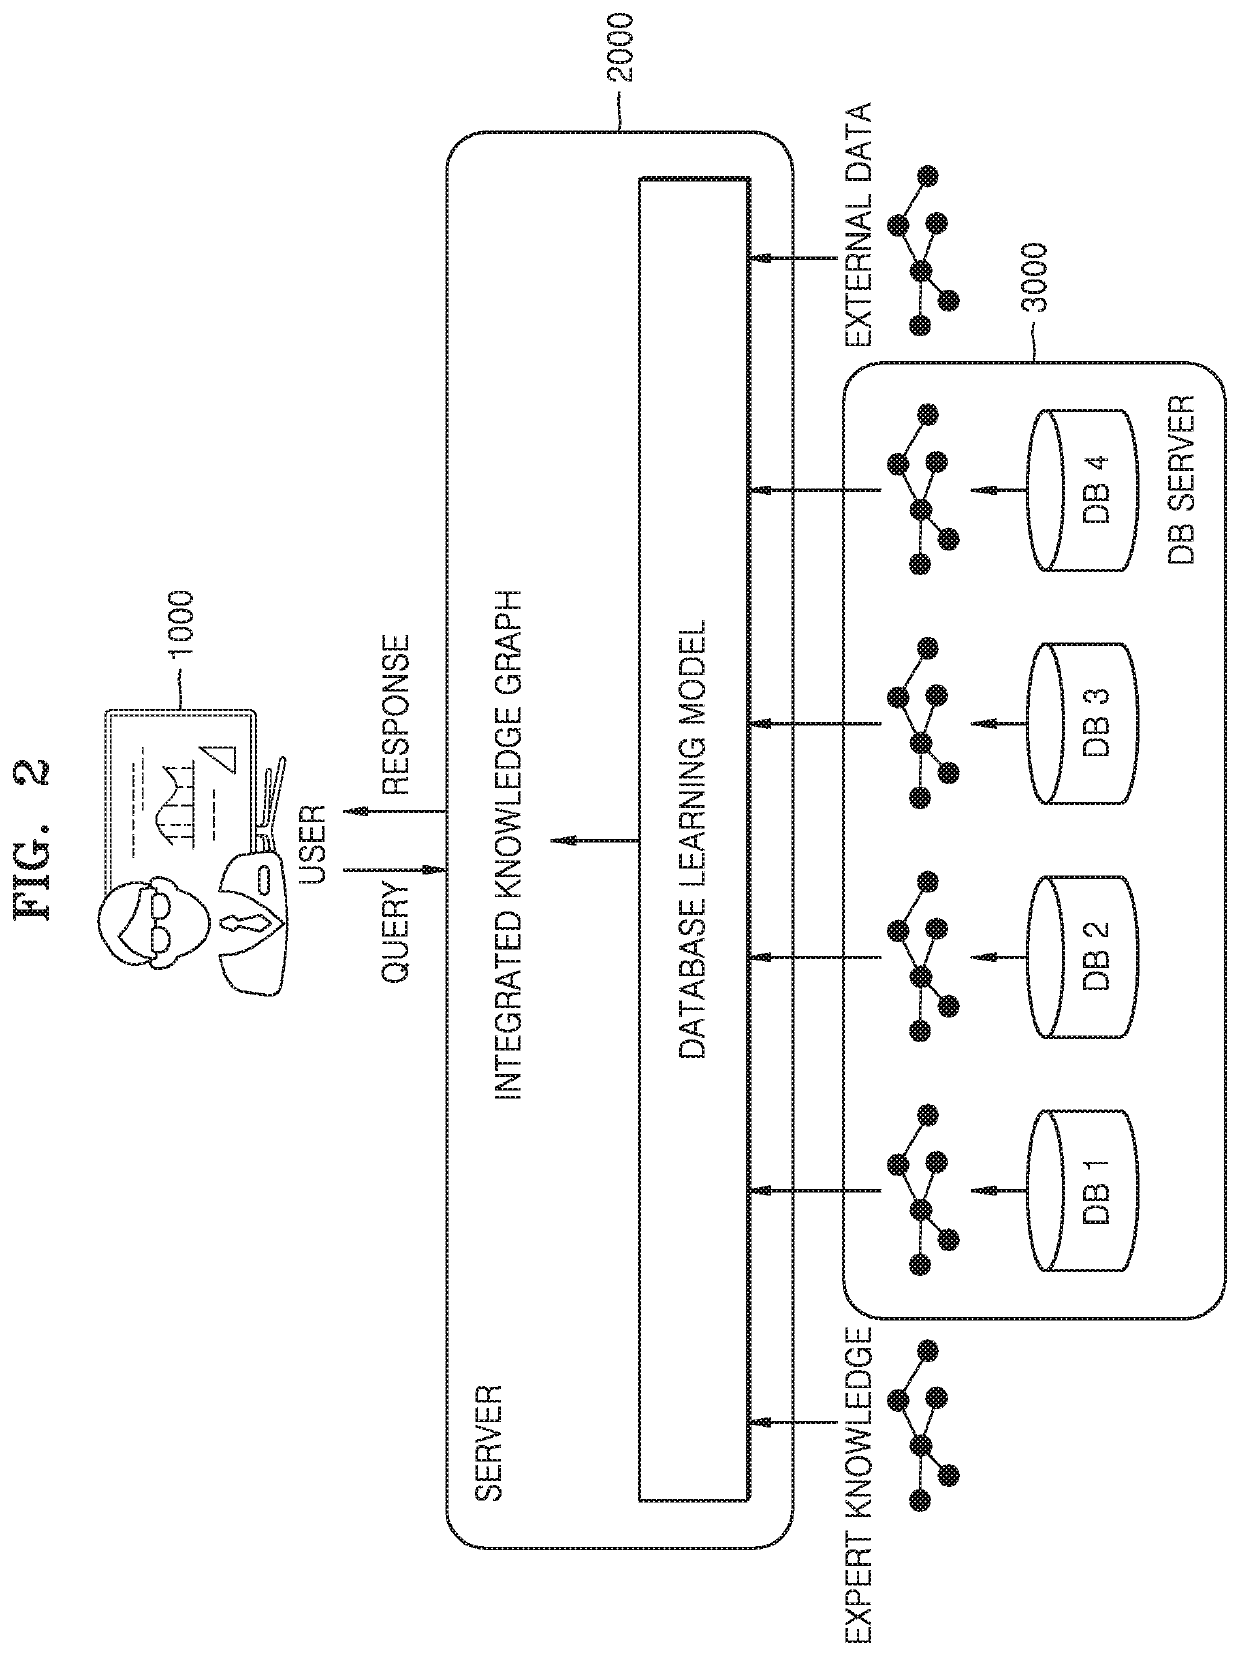 System and method of integrating databases based on knowledge graph